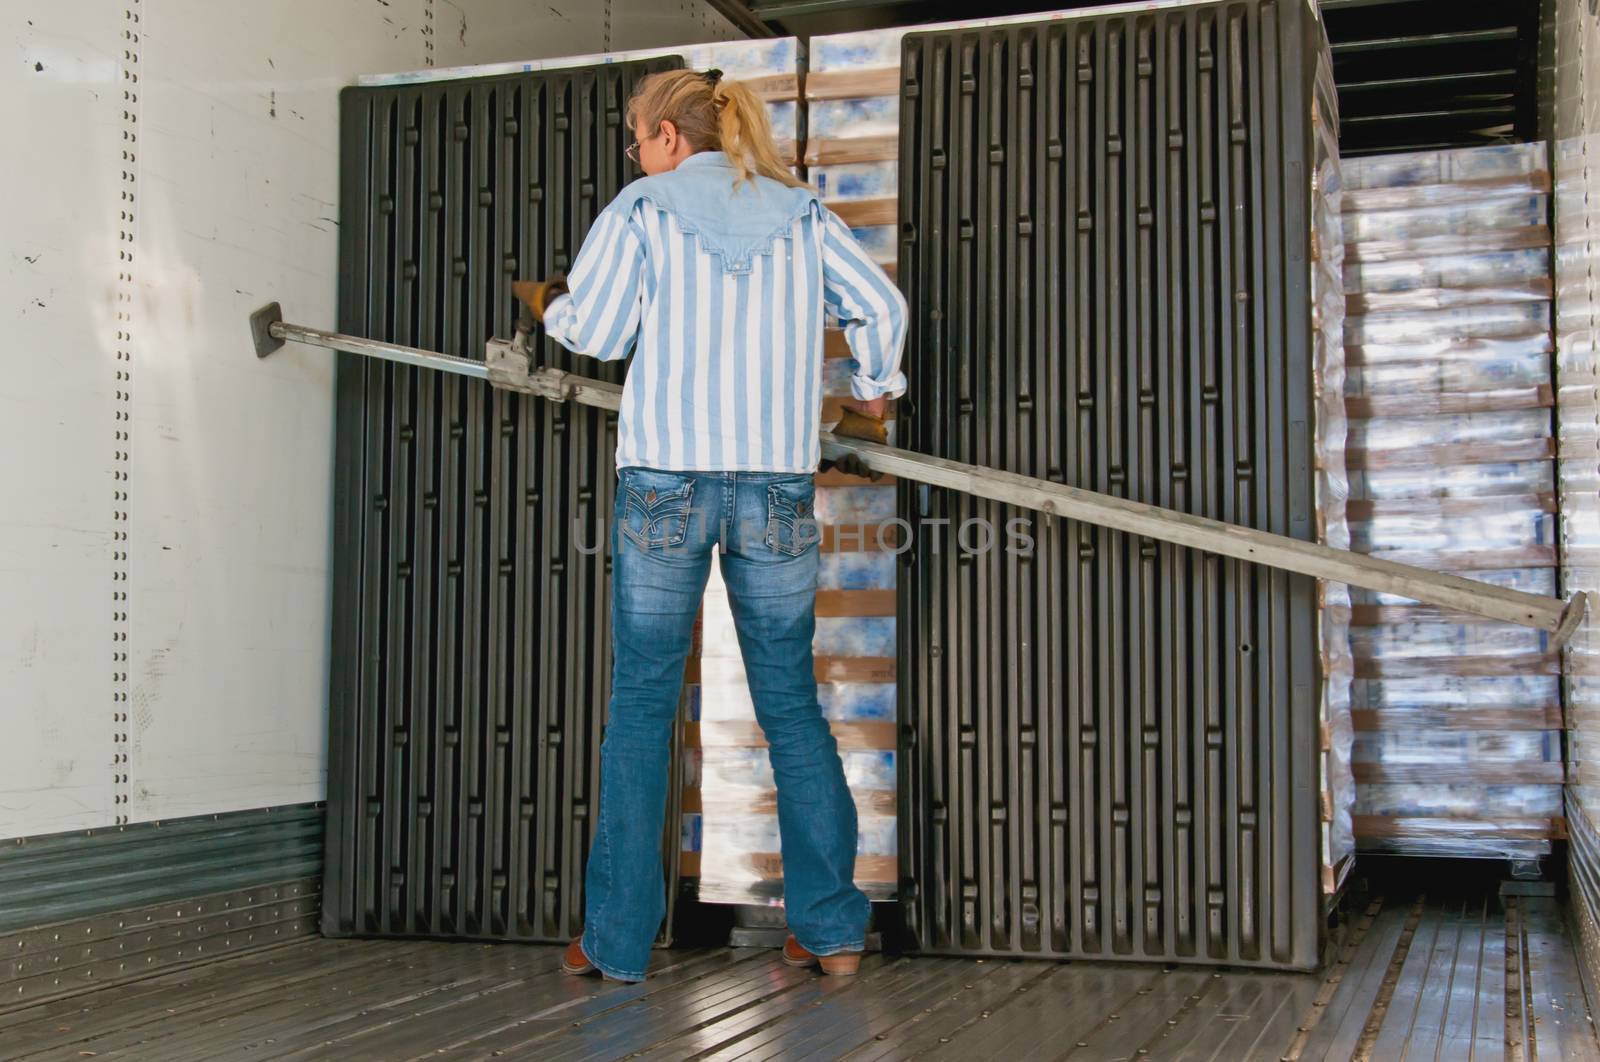 Pretty blonde woman placing a load-lock in the inside of a trailer to secure the loaded pallets during the upcoming trip.